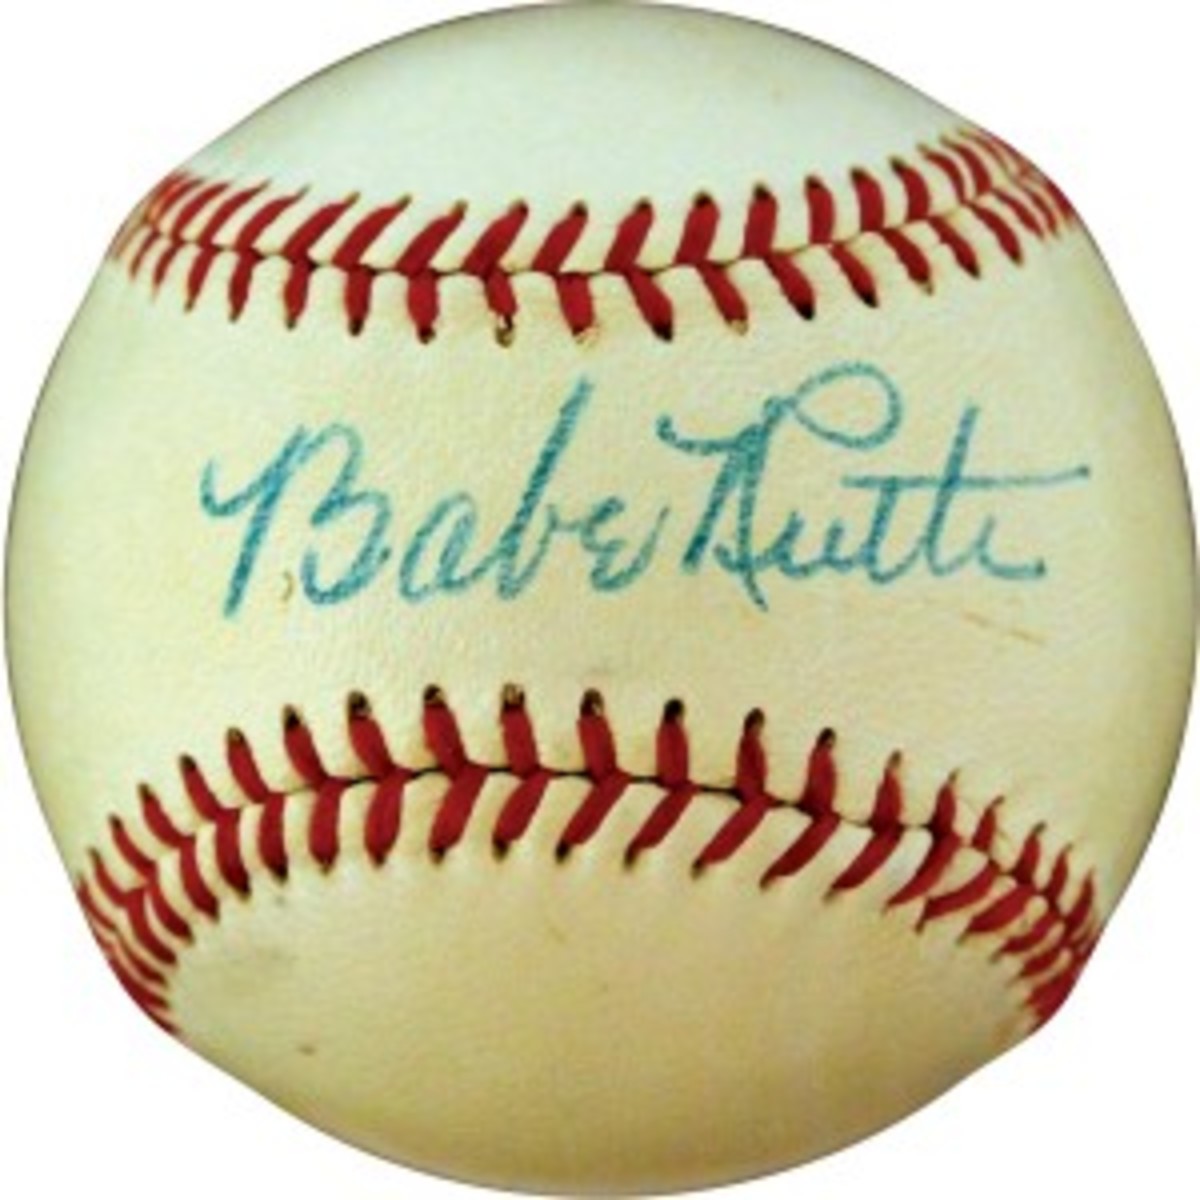 Three high-end Babe Ruth signed balls highlight Memory Lane's latest I Own It Now sale.